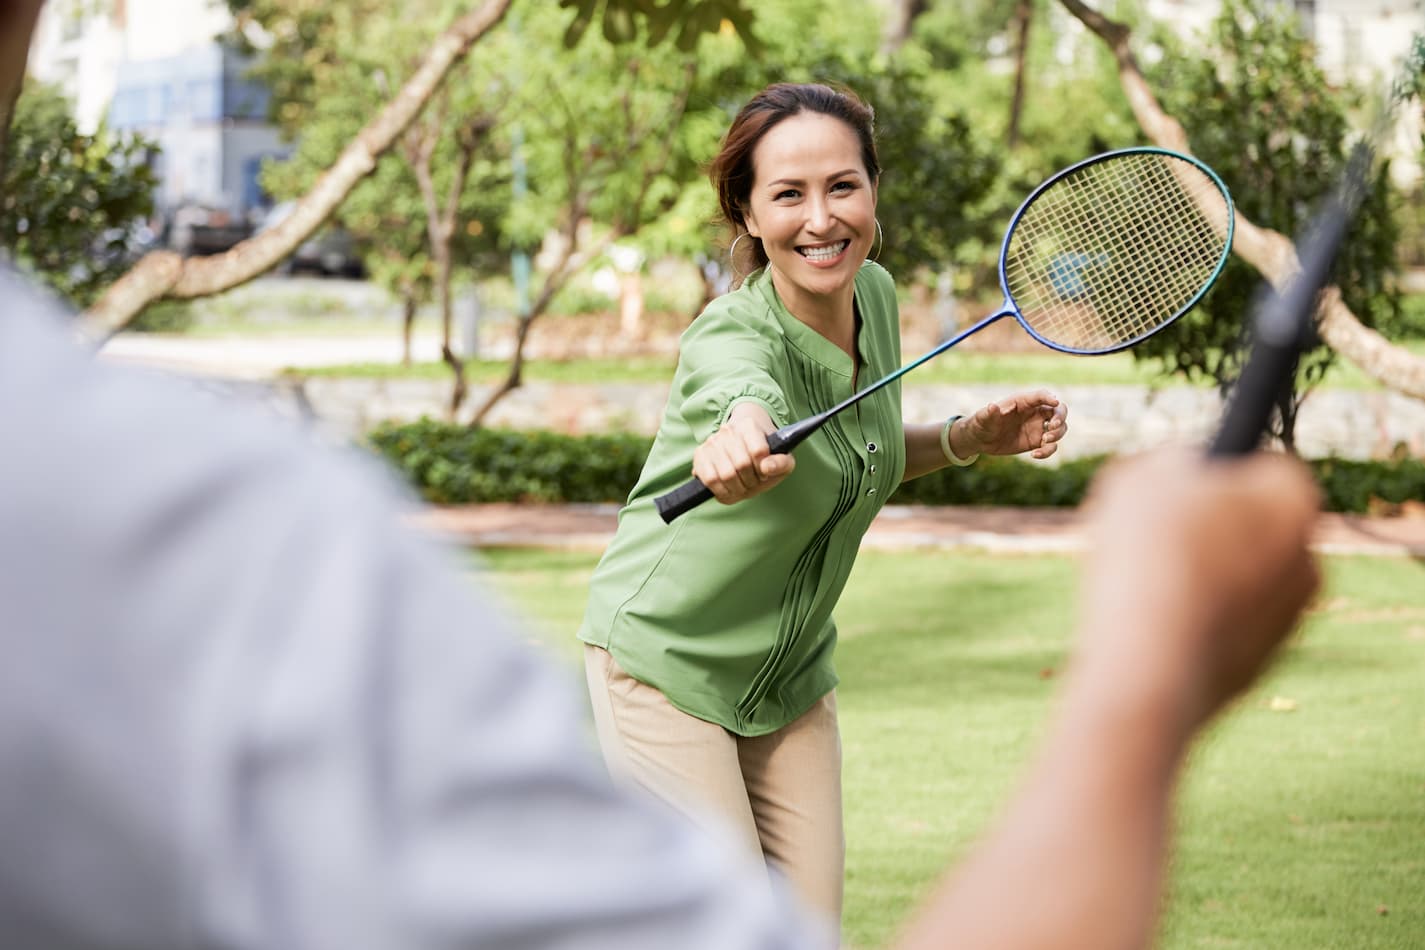 An image of a woman enjoying a game of badminton outdoors.